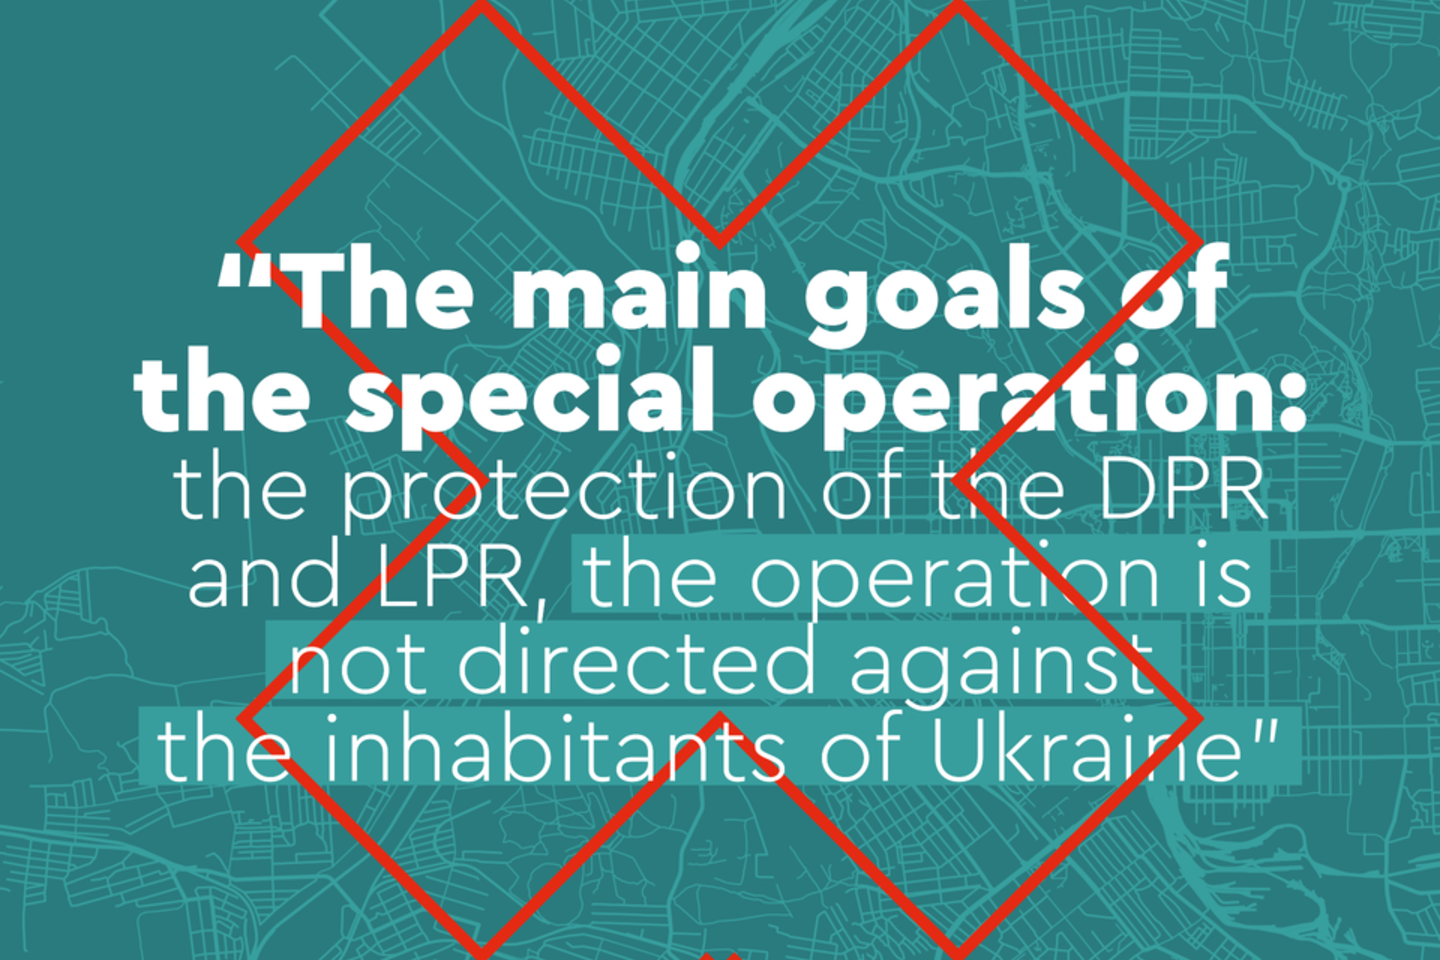 Propaganda message: „The main goals of the special operation: the protection of the DPR and LPR, the operation is not directed against the inhabitants of Ukraine“.